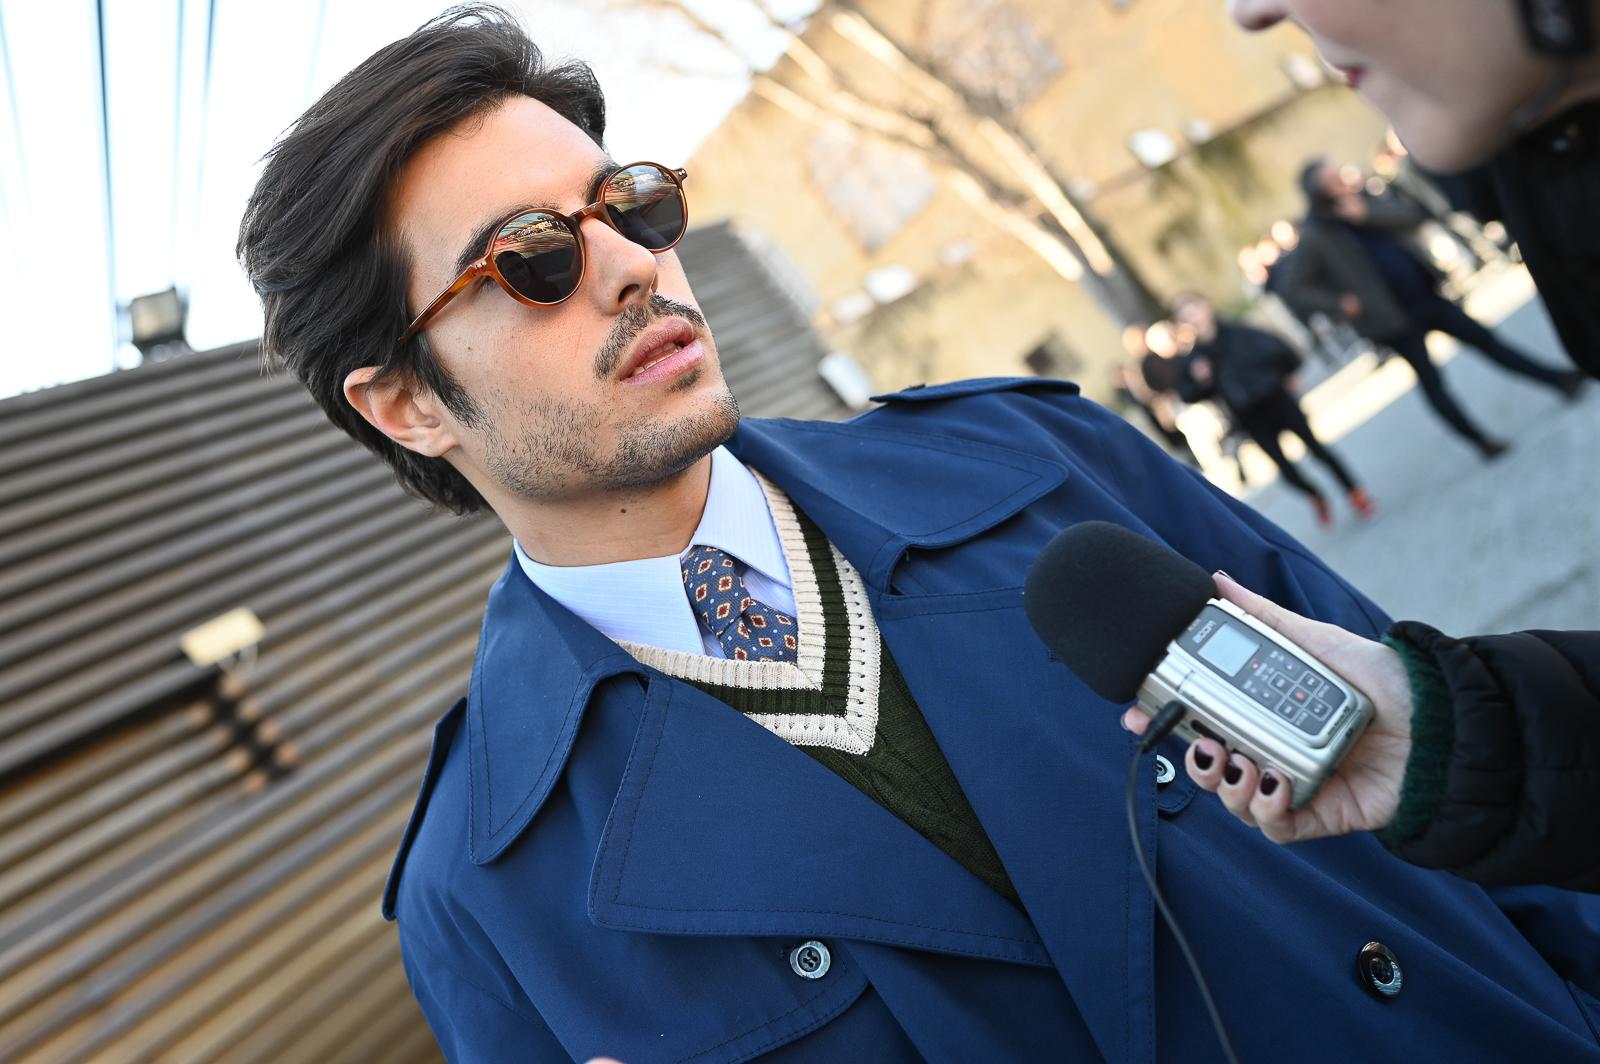 Raul Vidal interviewed for 2Goodmedia's Podcast during Pitti Uomo